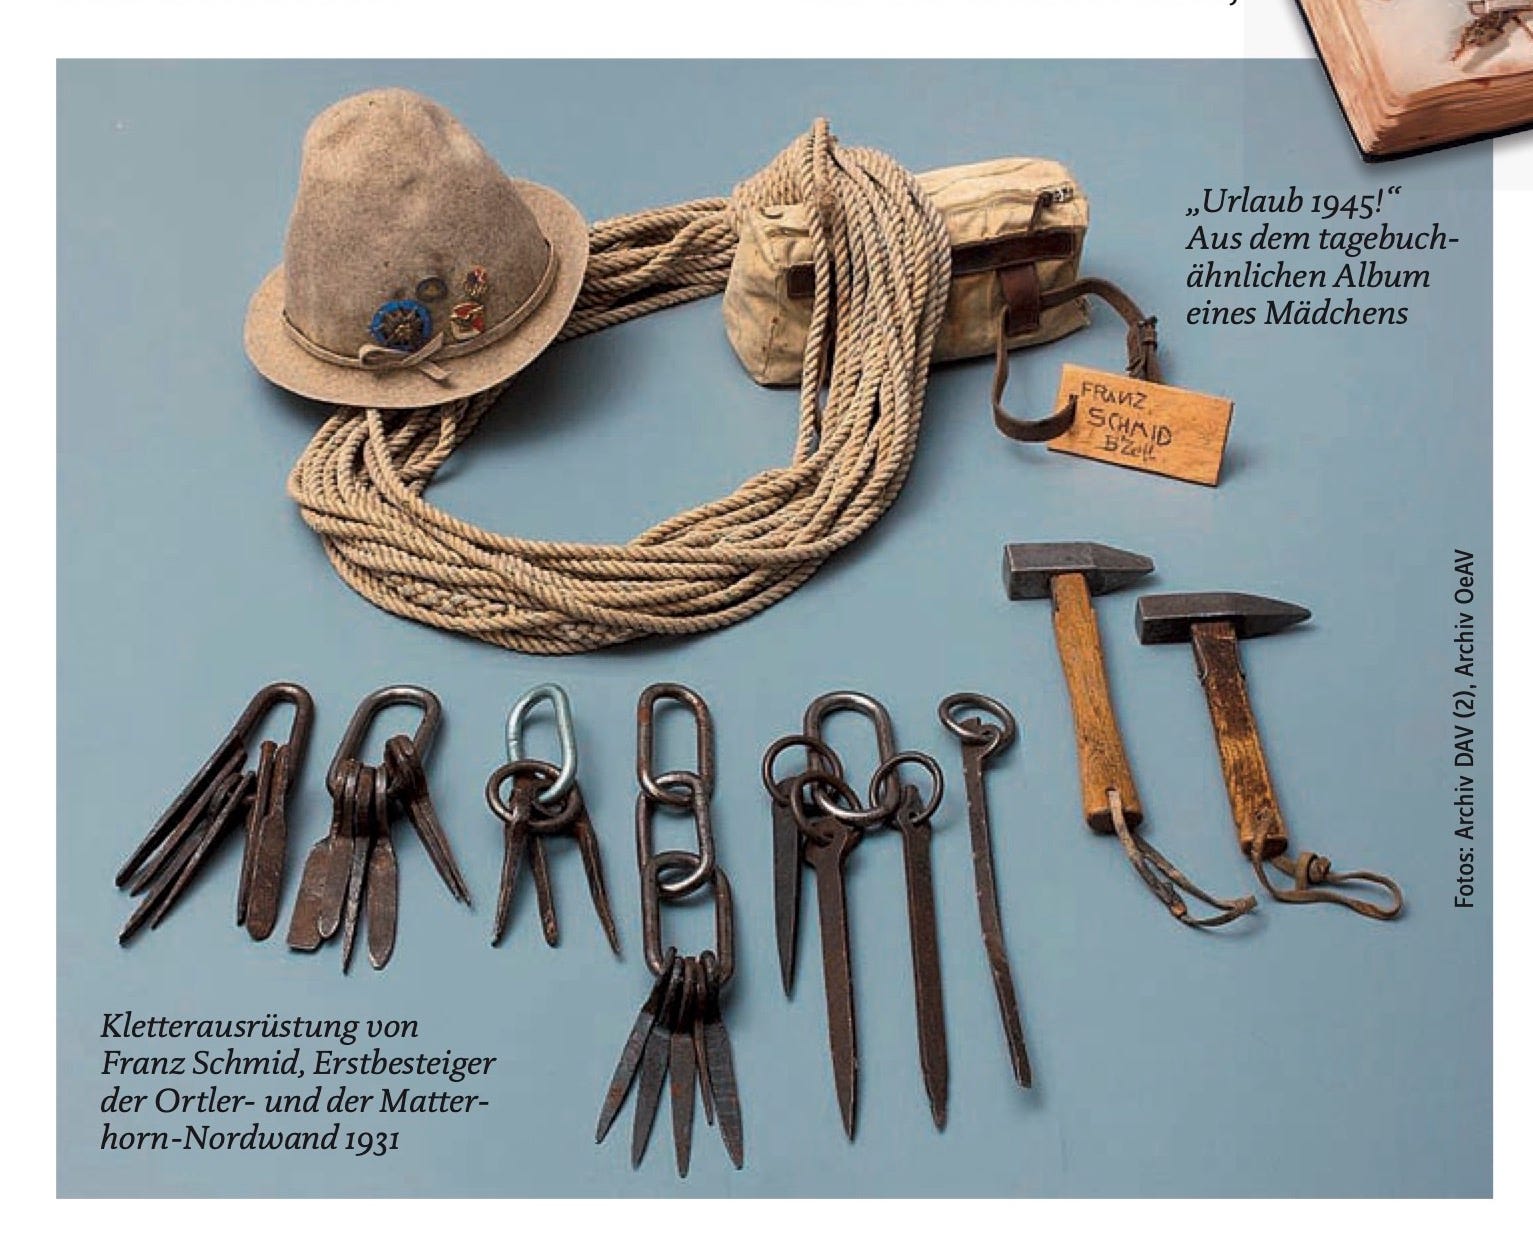 Climbing Tools and Techniques—1908 to 1939-Aid Climbing Mastery (Europe,  PartB 1st draft)